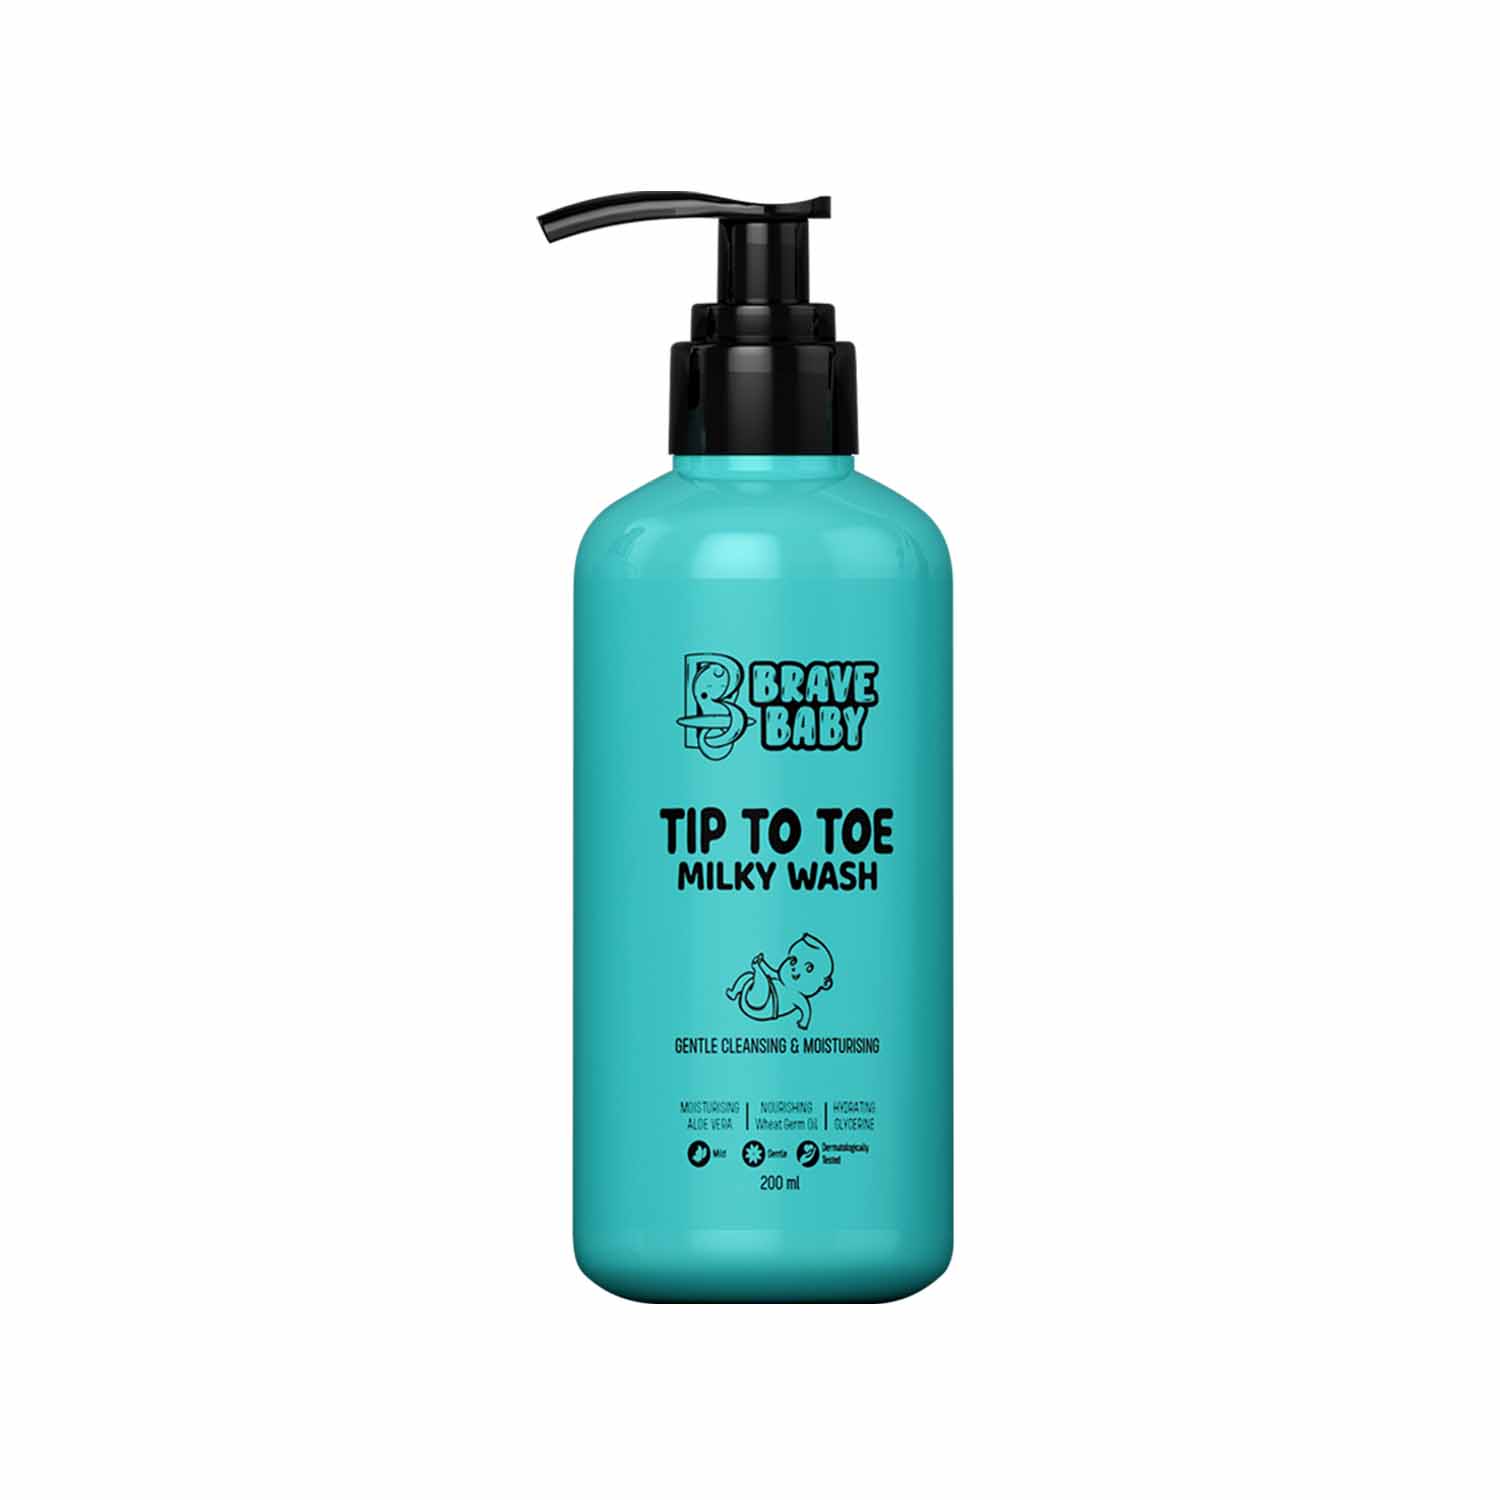 Tip To Toe Milky Wash